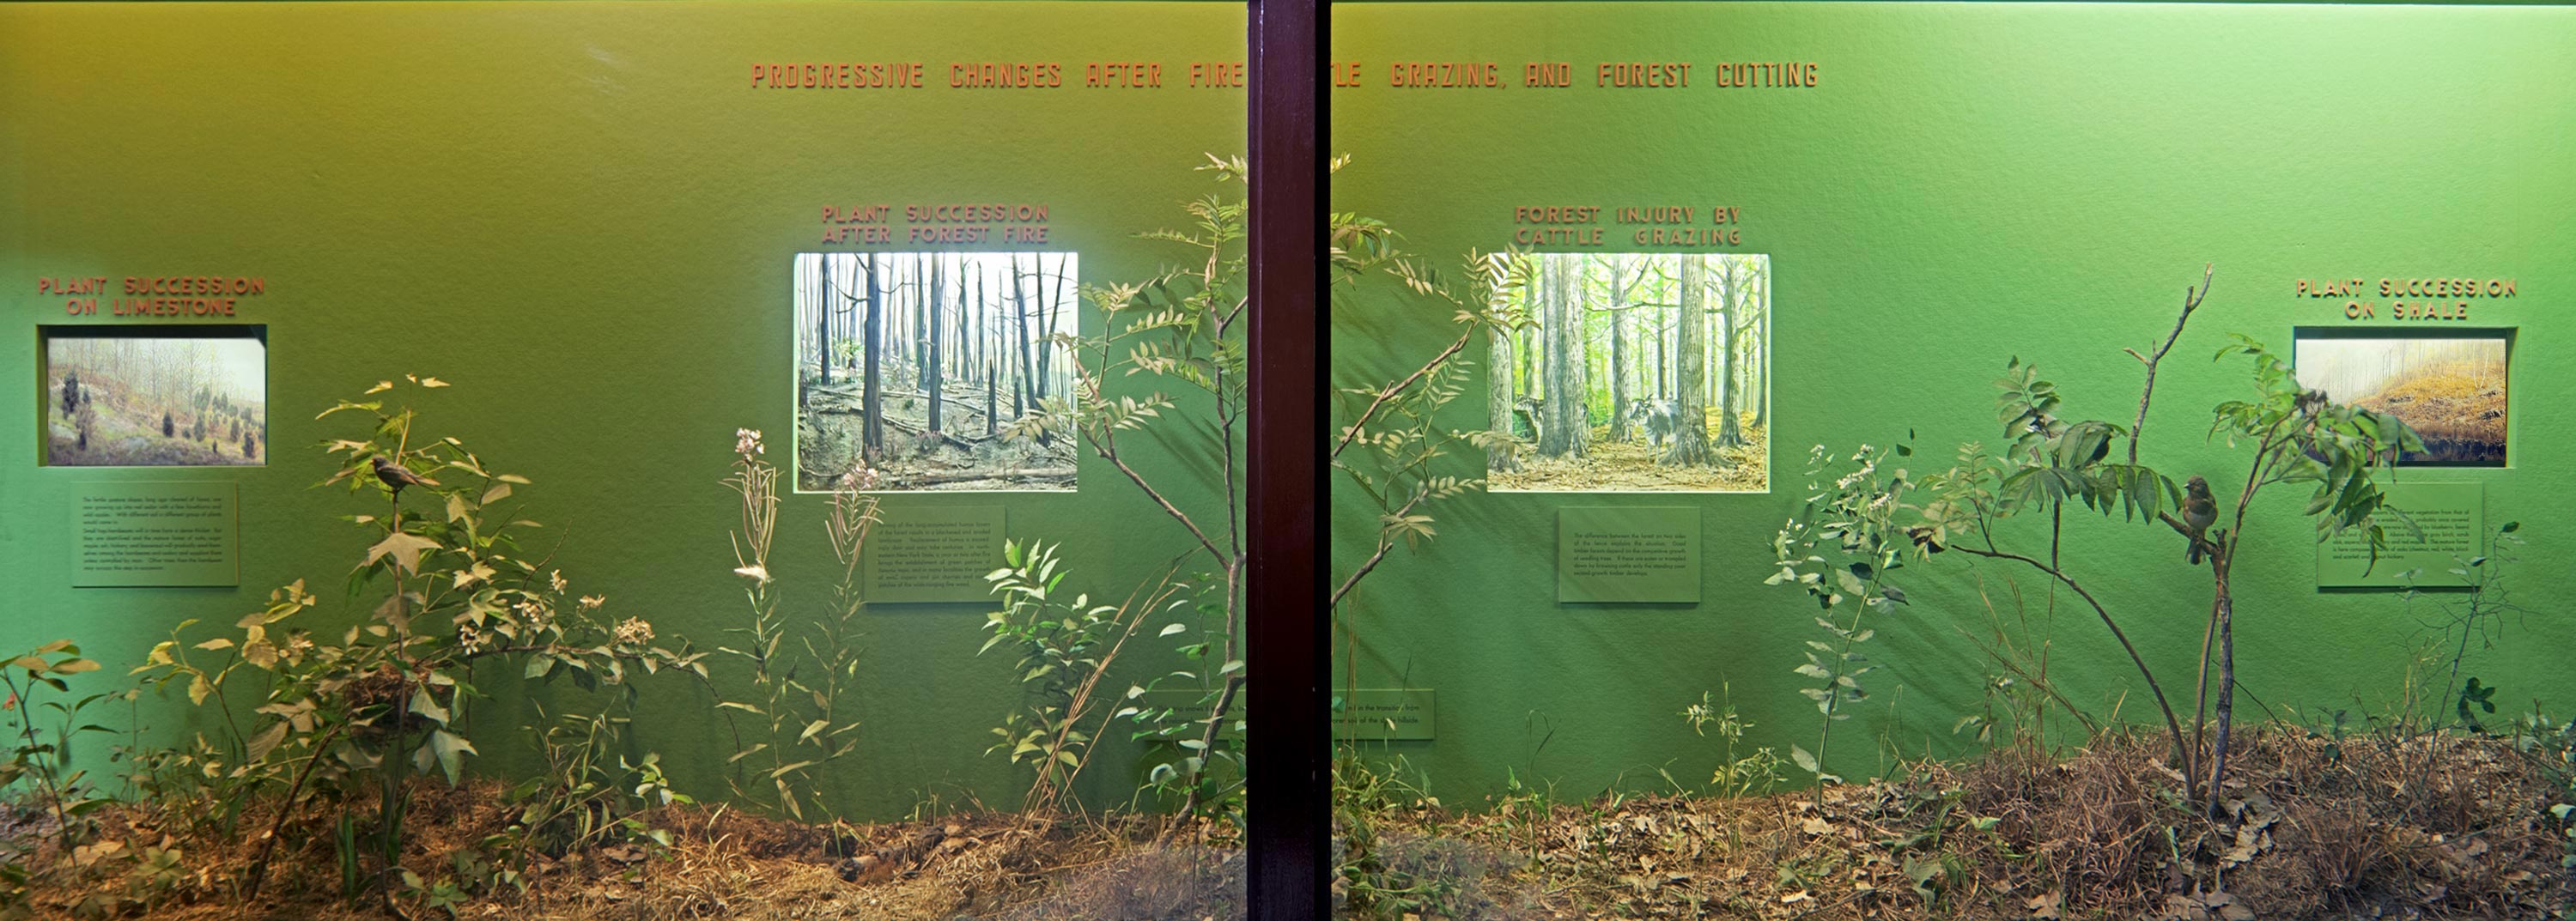 Museum case showing forest flora and dioramas illustrating different stages of the forest.